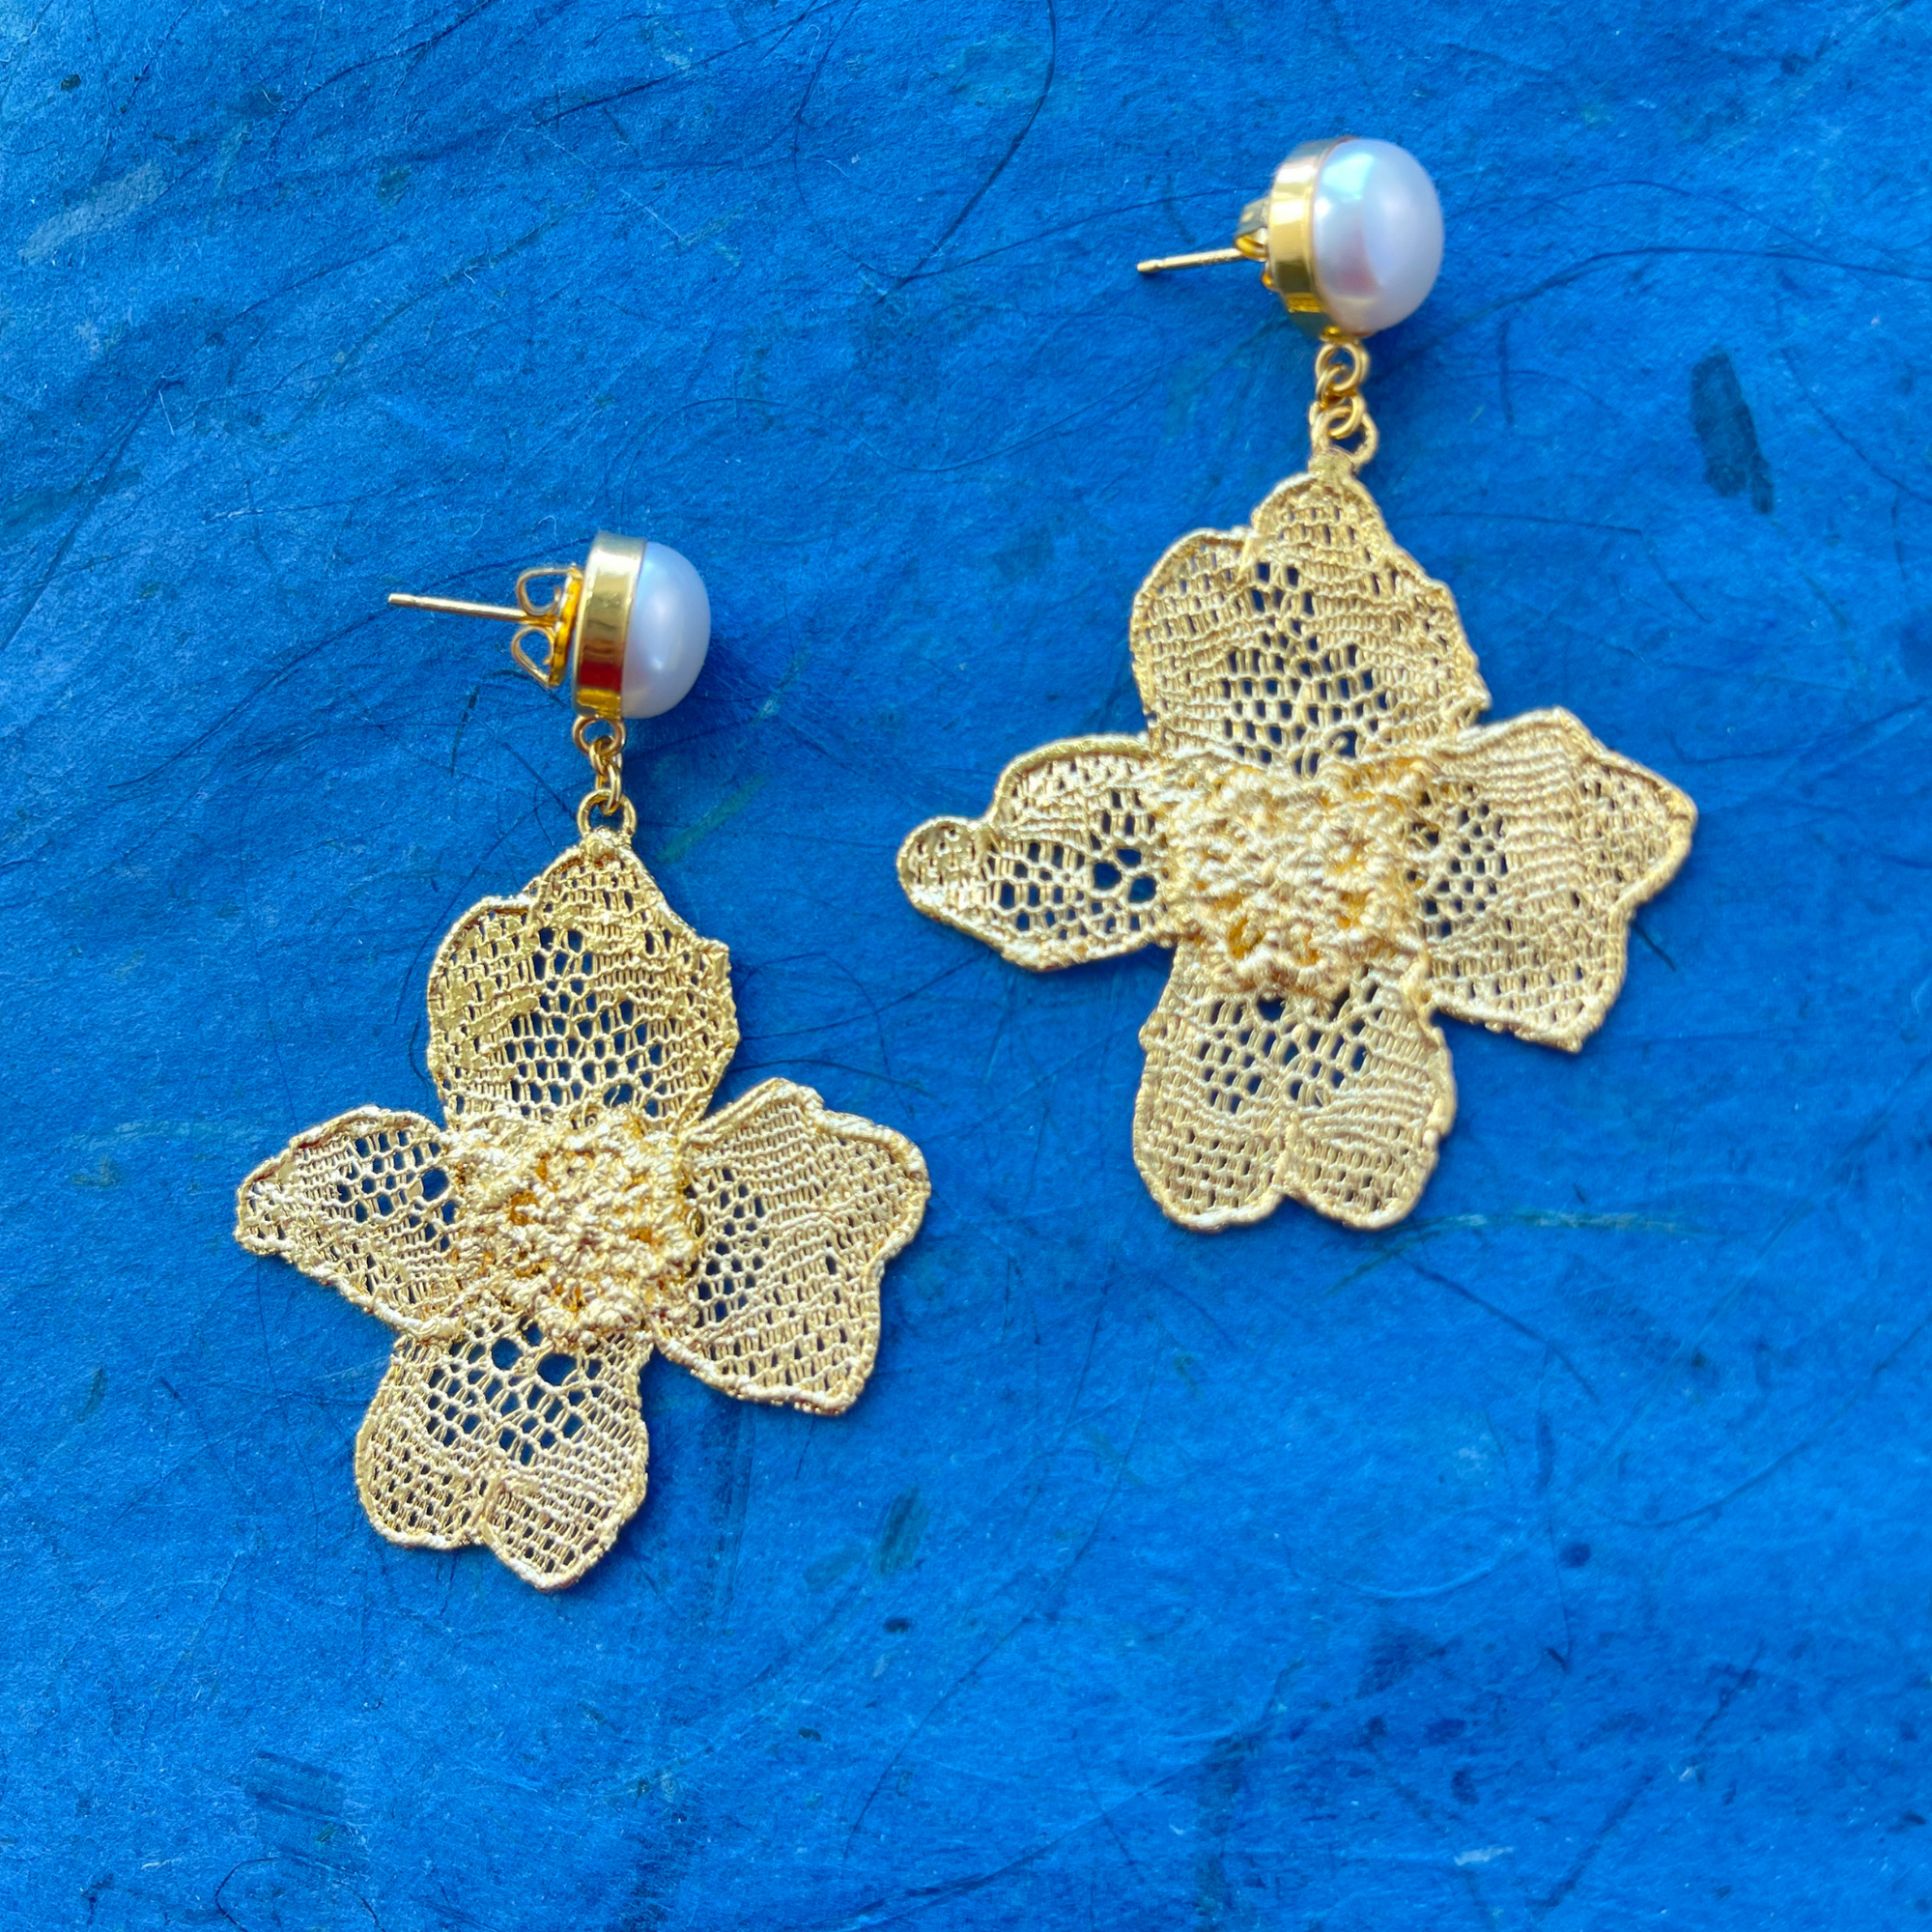 Drop pearl earrings with large lace flower in 24k gold.